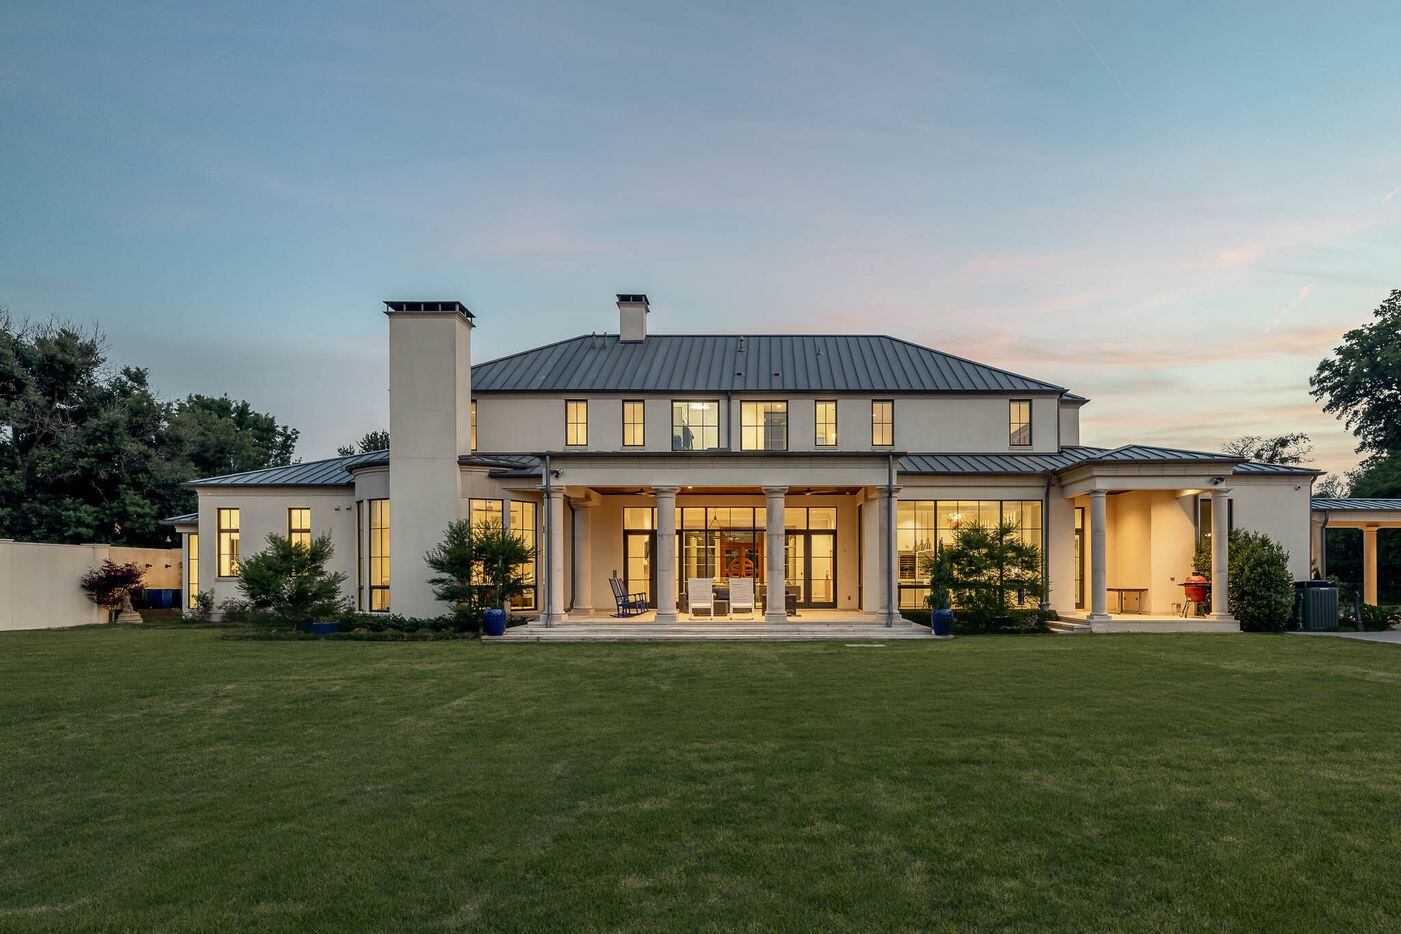 Take a look at the home at 4515 Harrys Lane in Dallas.